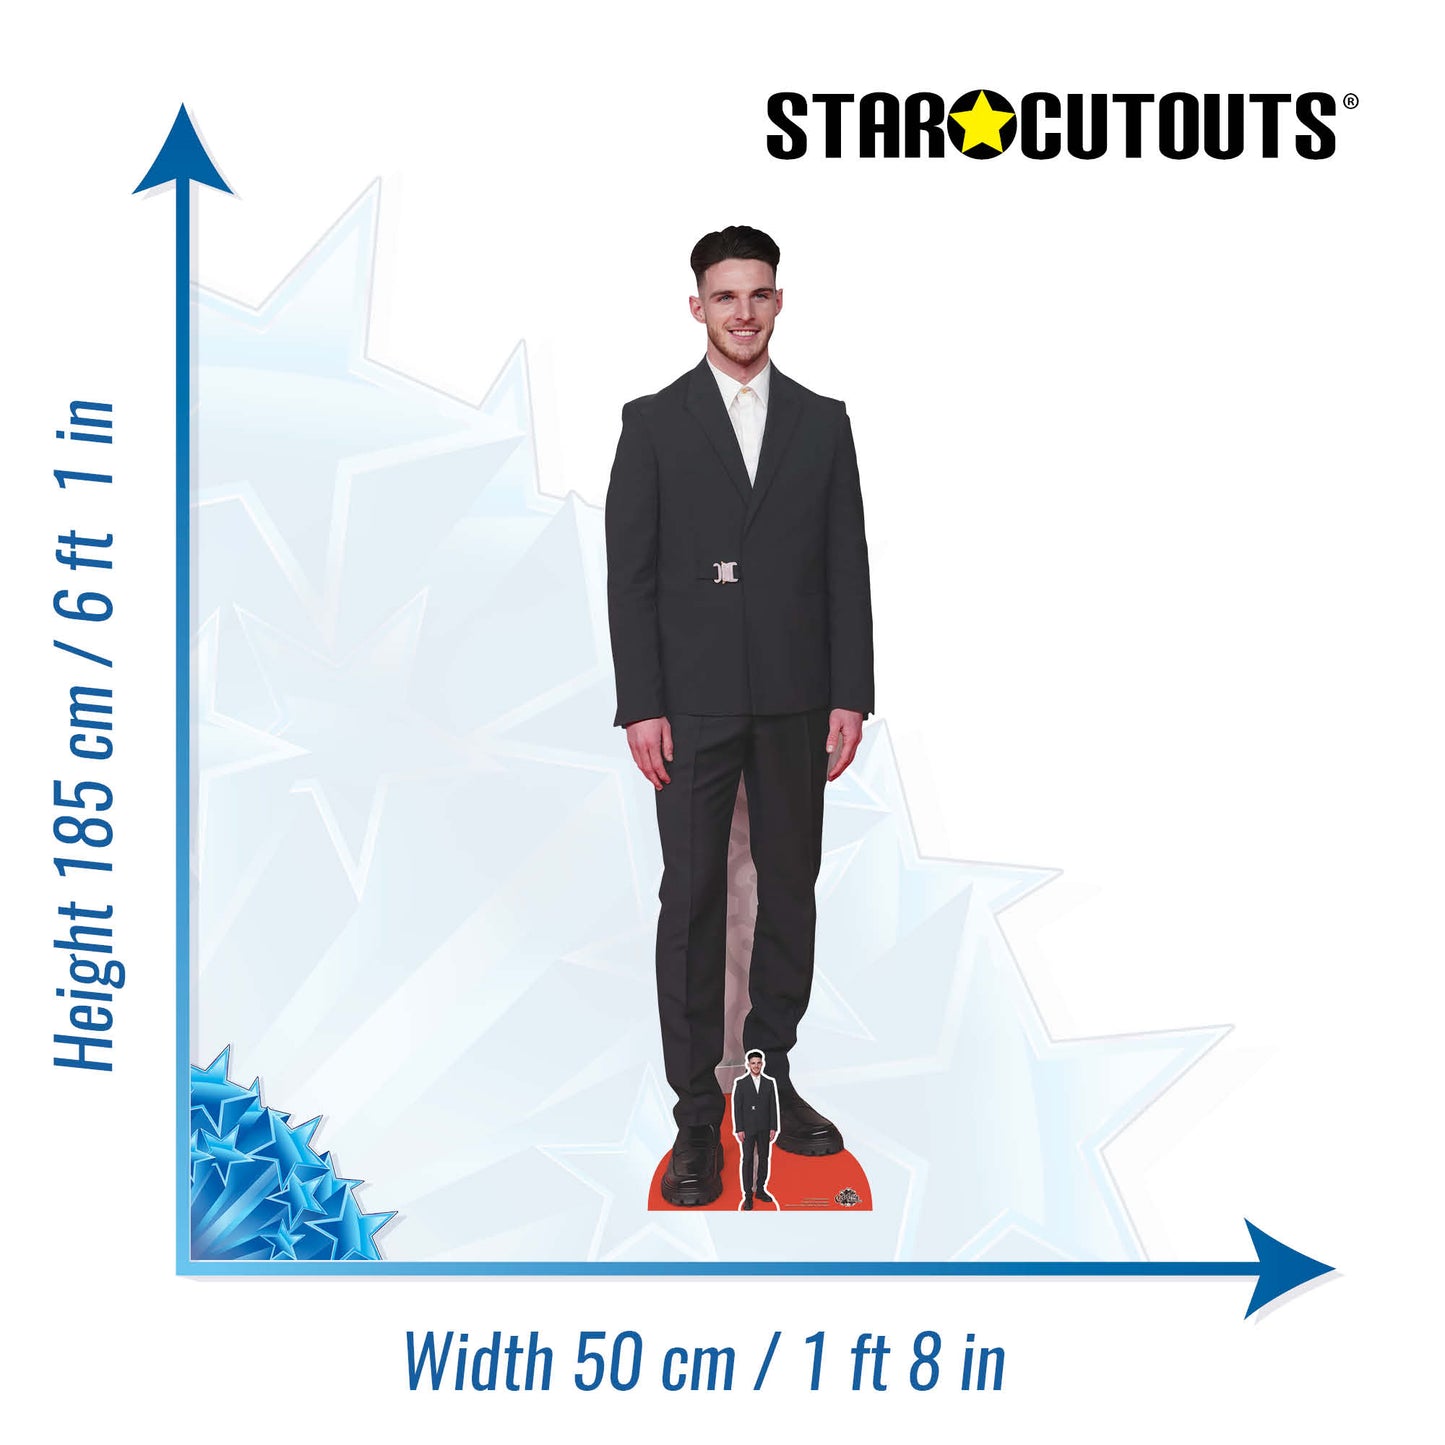 CS1133 Declan Rice Height 185cm Lifesize Cardboard Cut Out With Mini